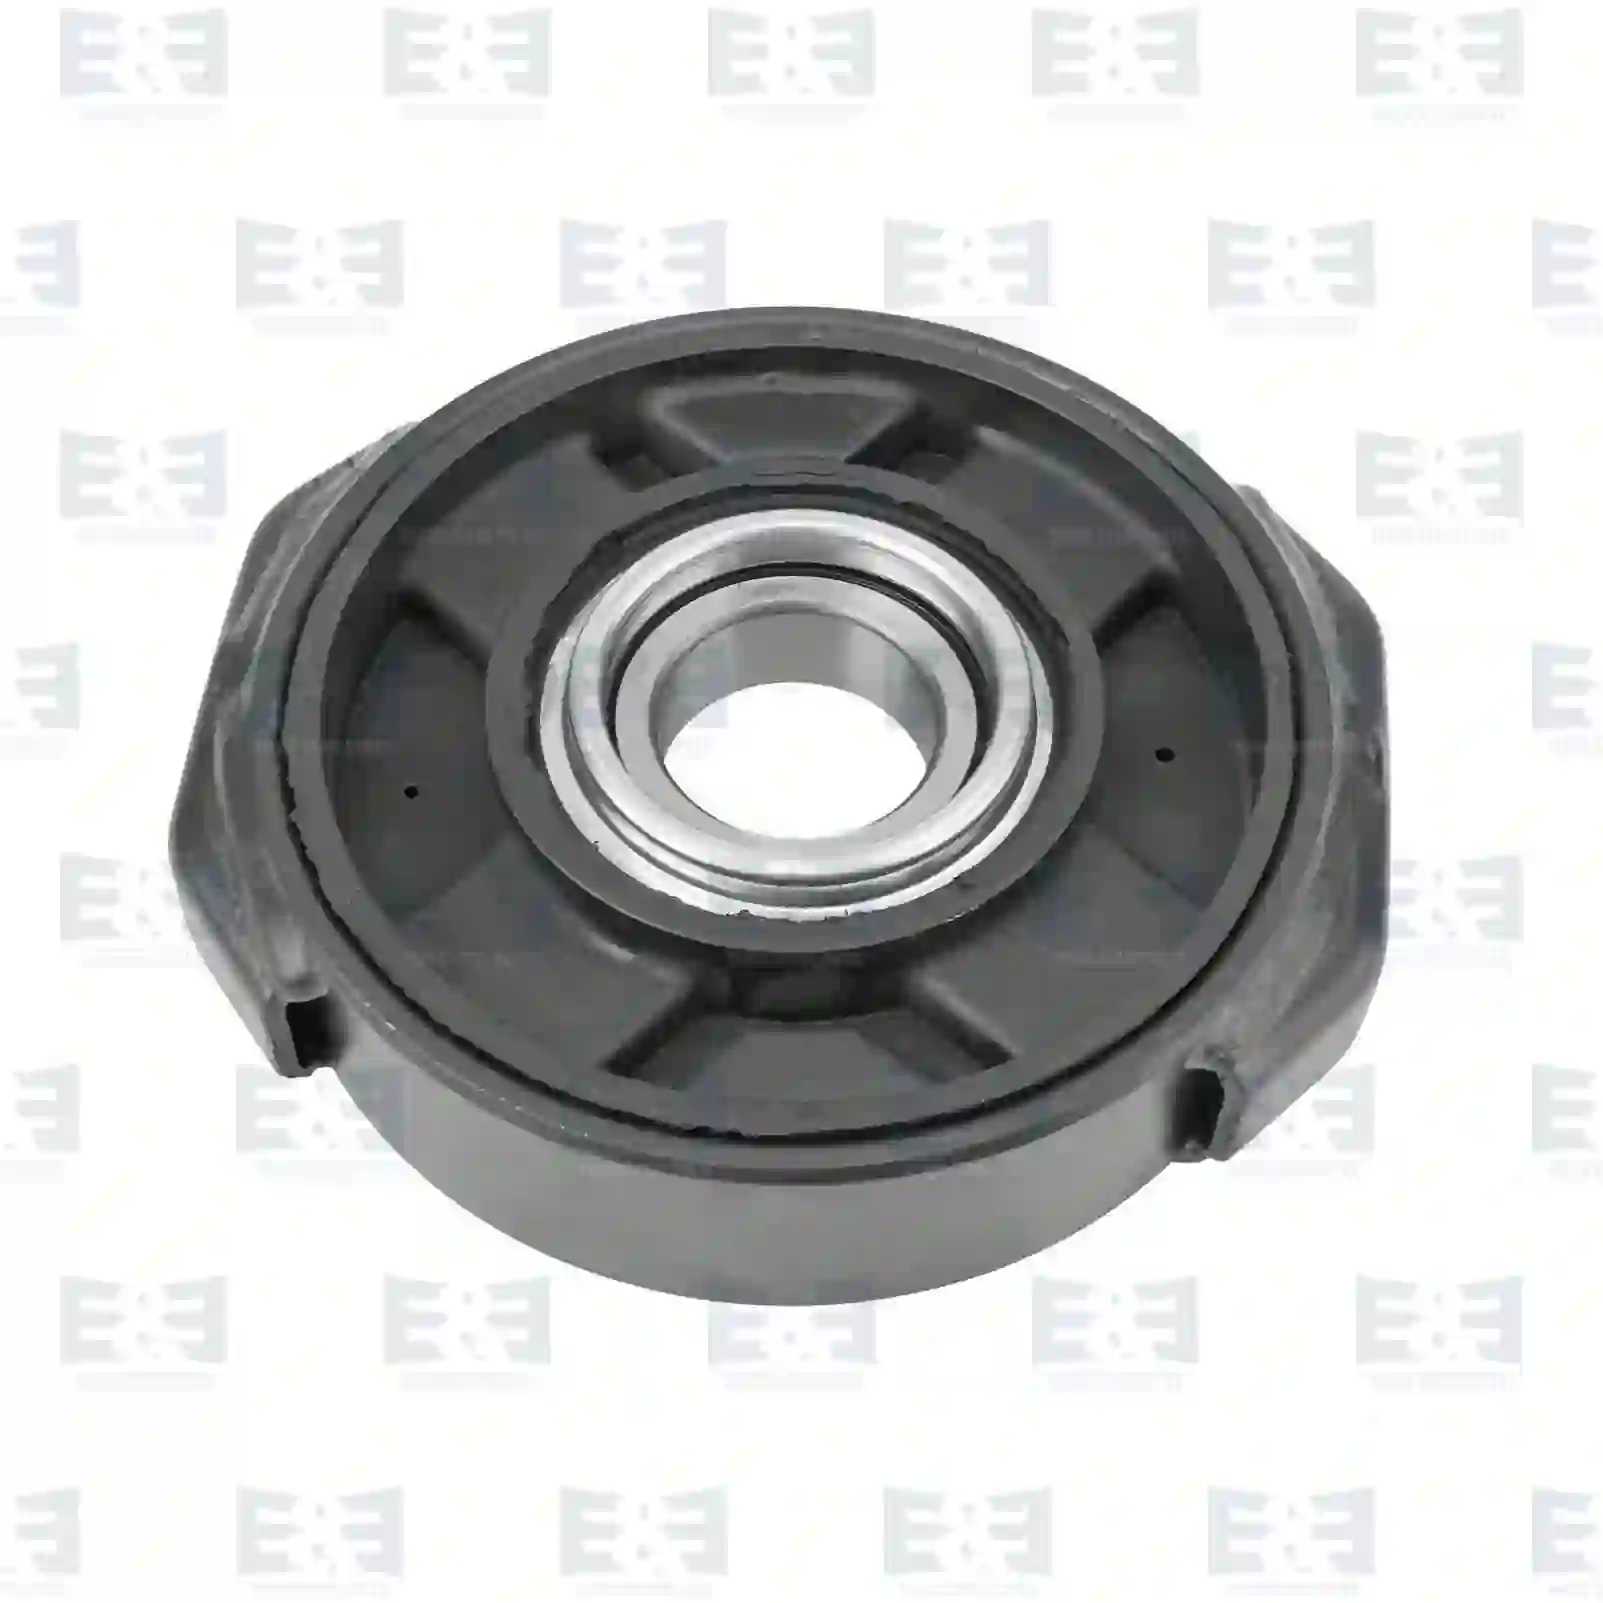 Support Bearing Center bearing, EE No 2E2276854 ,  oem no:3814100010, 3814100222, 3814100422, 3814101222, 3814101522, 3854100010, 3854101522, 3855860041, 3954100222, 3954100422, ZG02481-0008 E&E Truck Spare Parts | Truck Spare Parts, Auotomotive Spare Parts